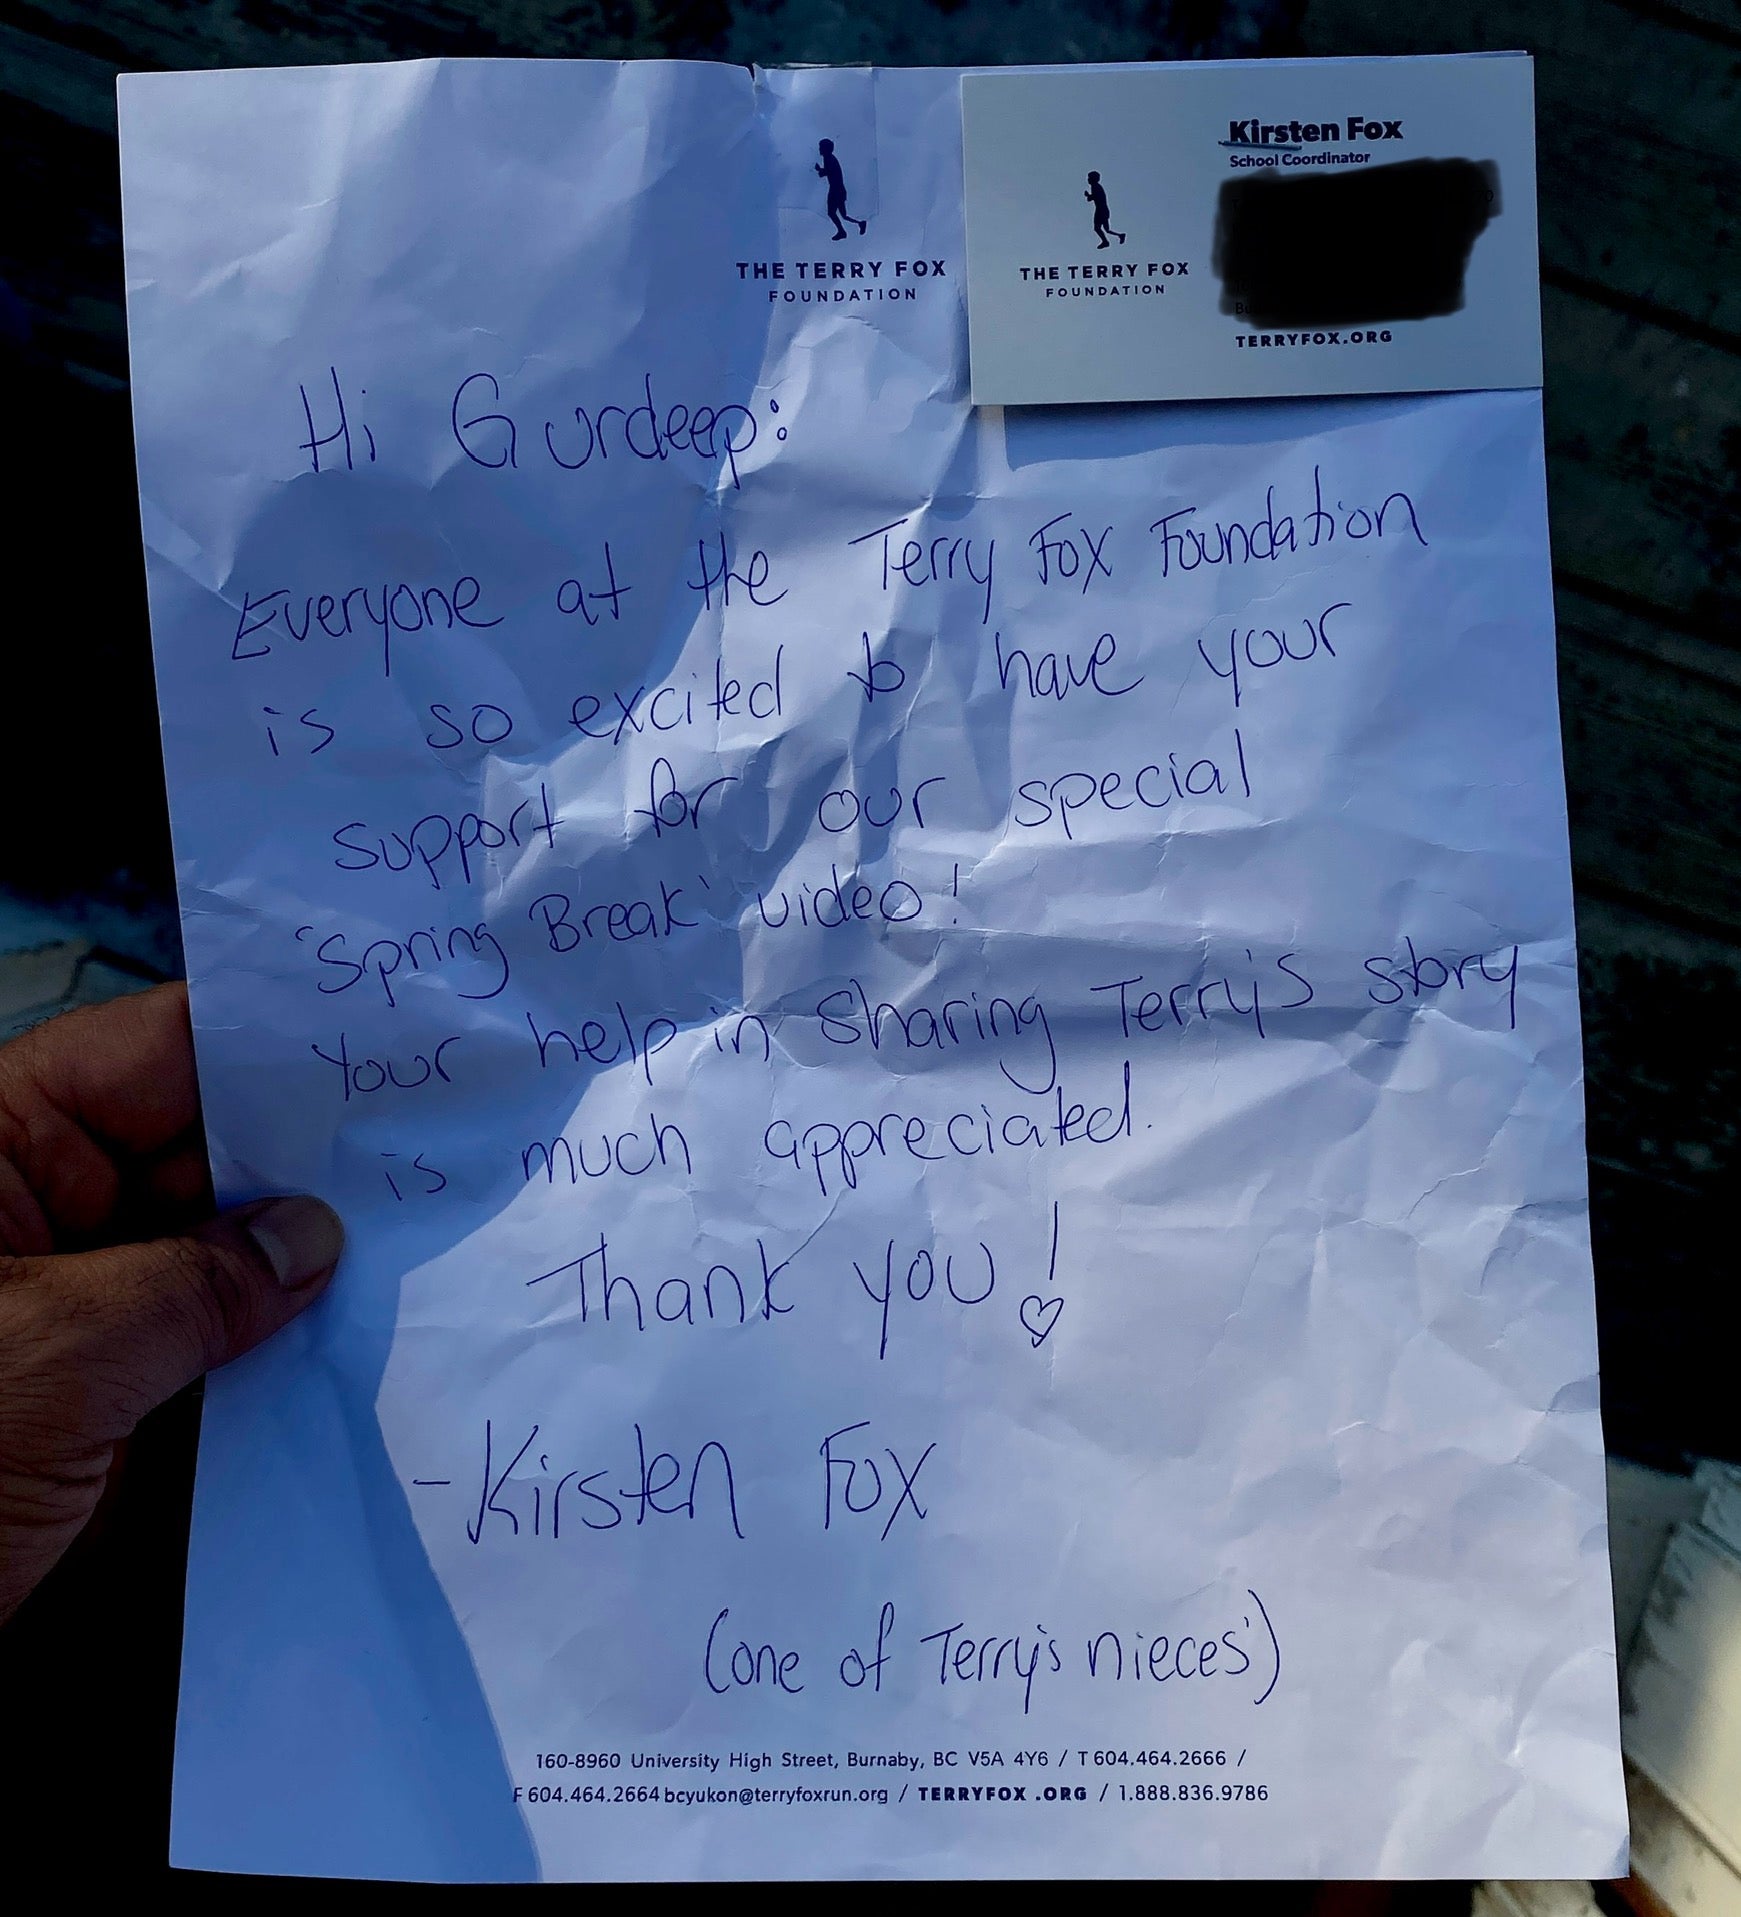 A note from Kirsten Fox, one of Terry Fox's nieces